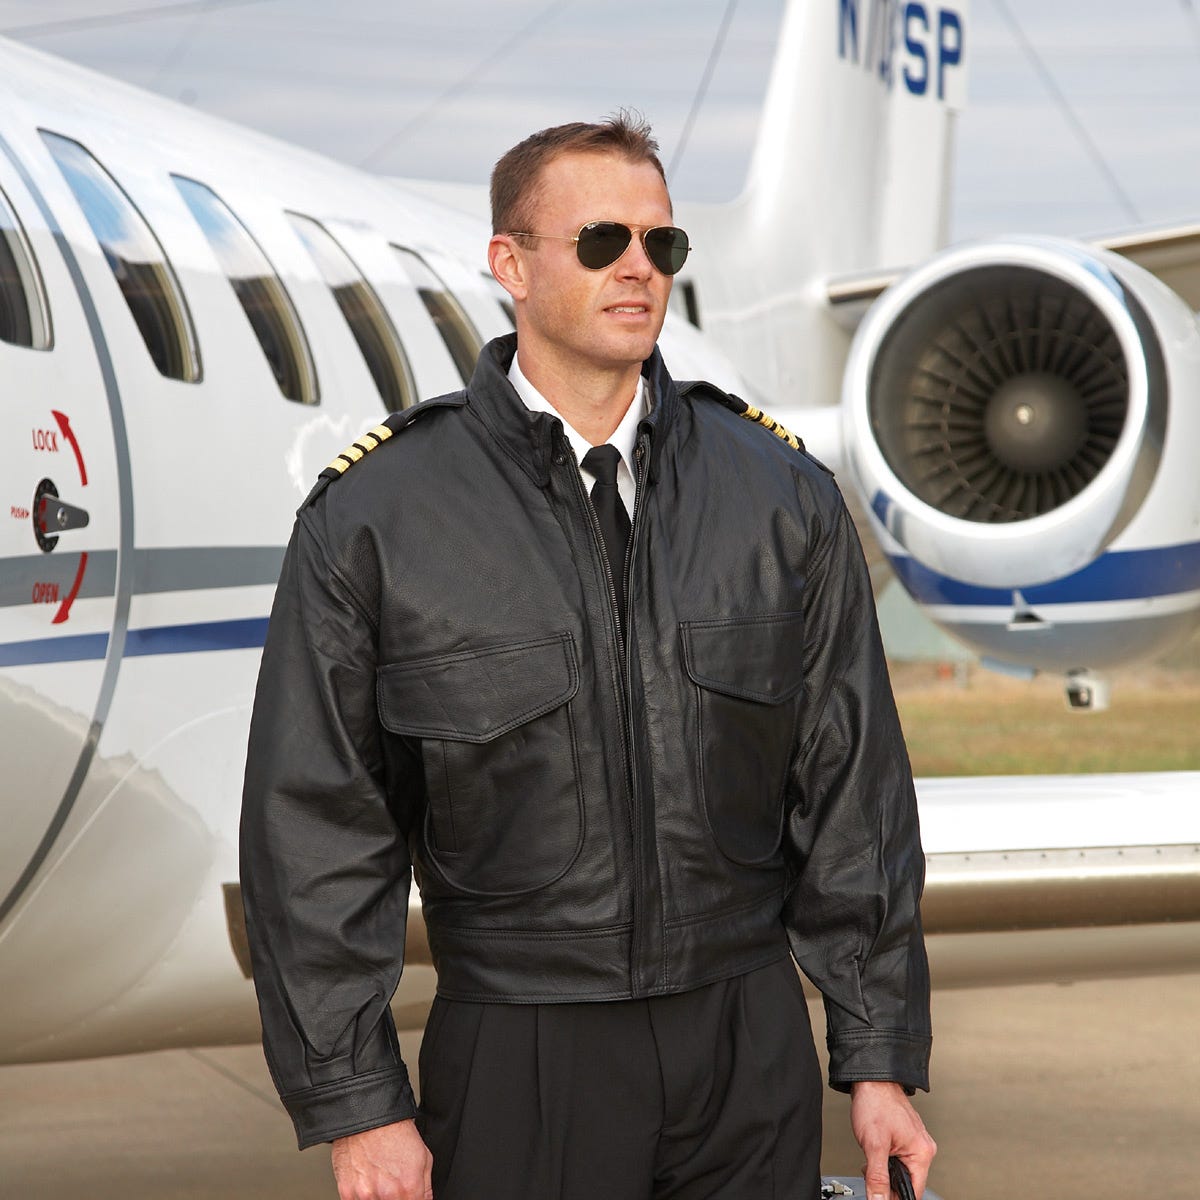 Airline Captain's Leather Flight Jacket | Apparel and Sunglasses ...